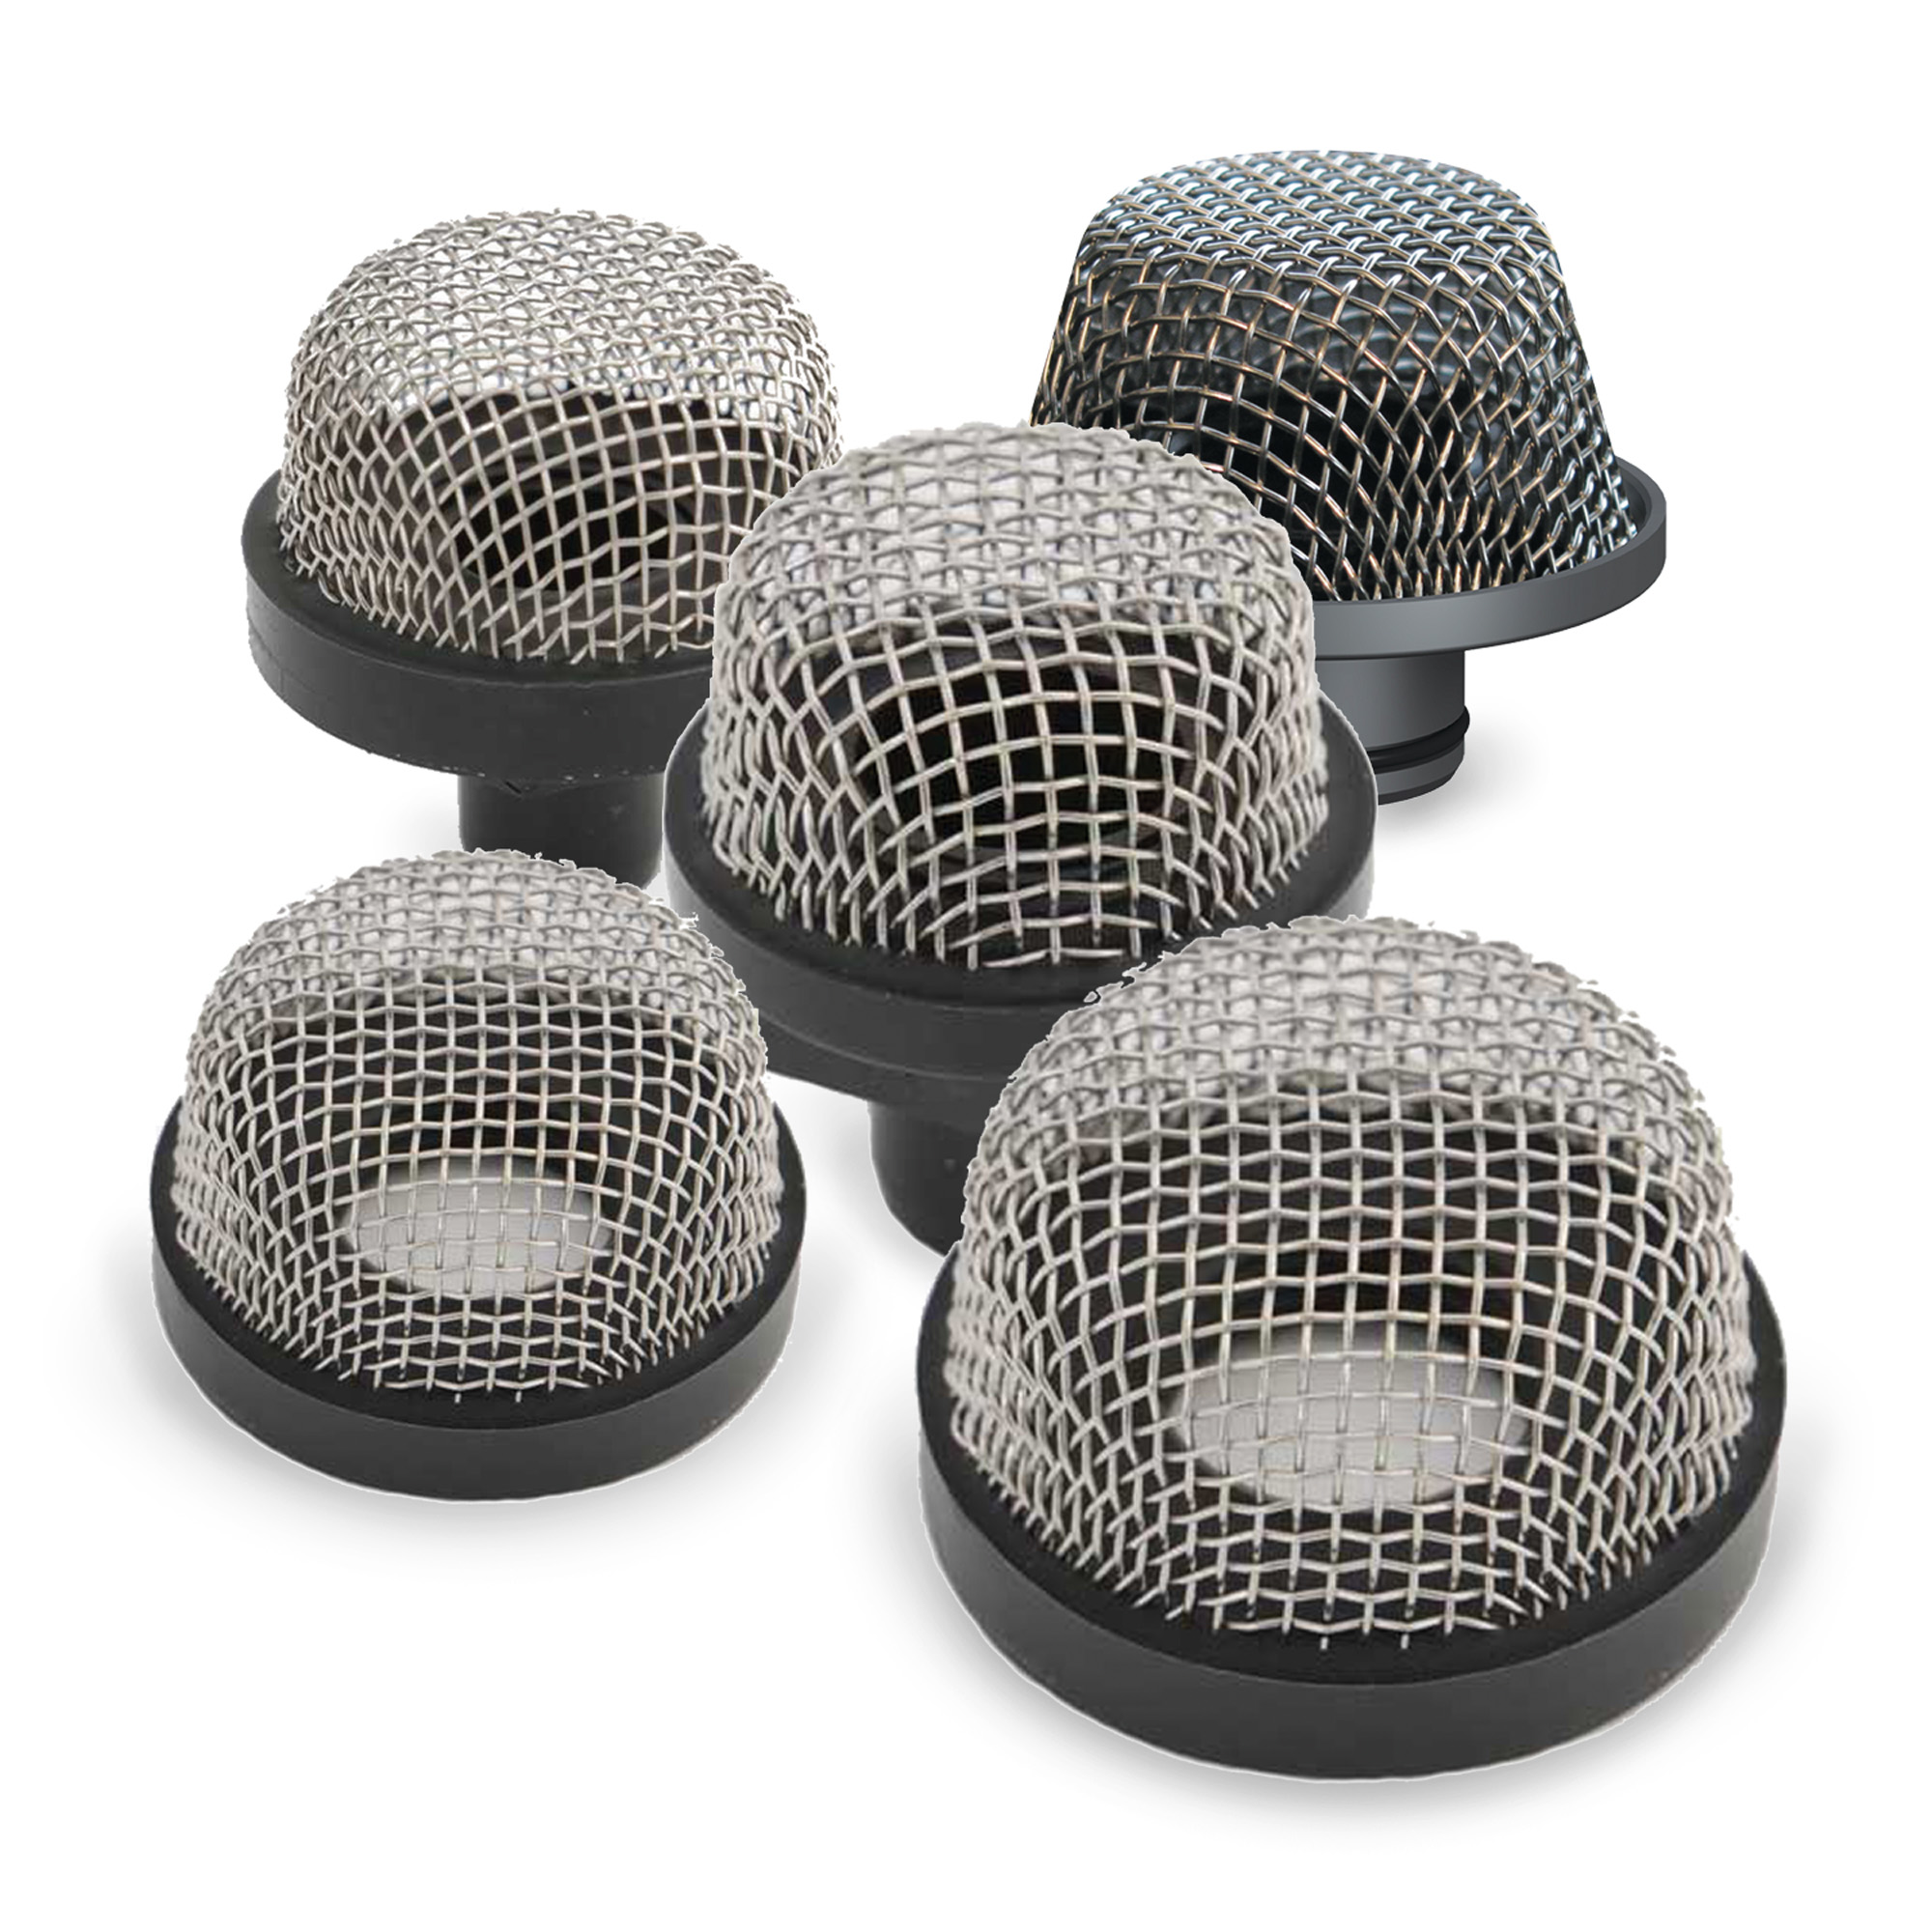 Product category - Strainers